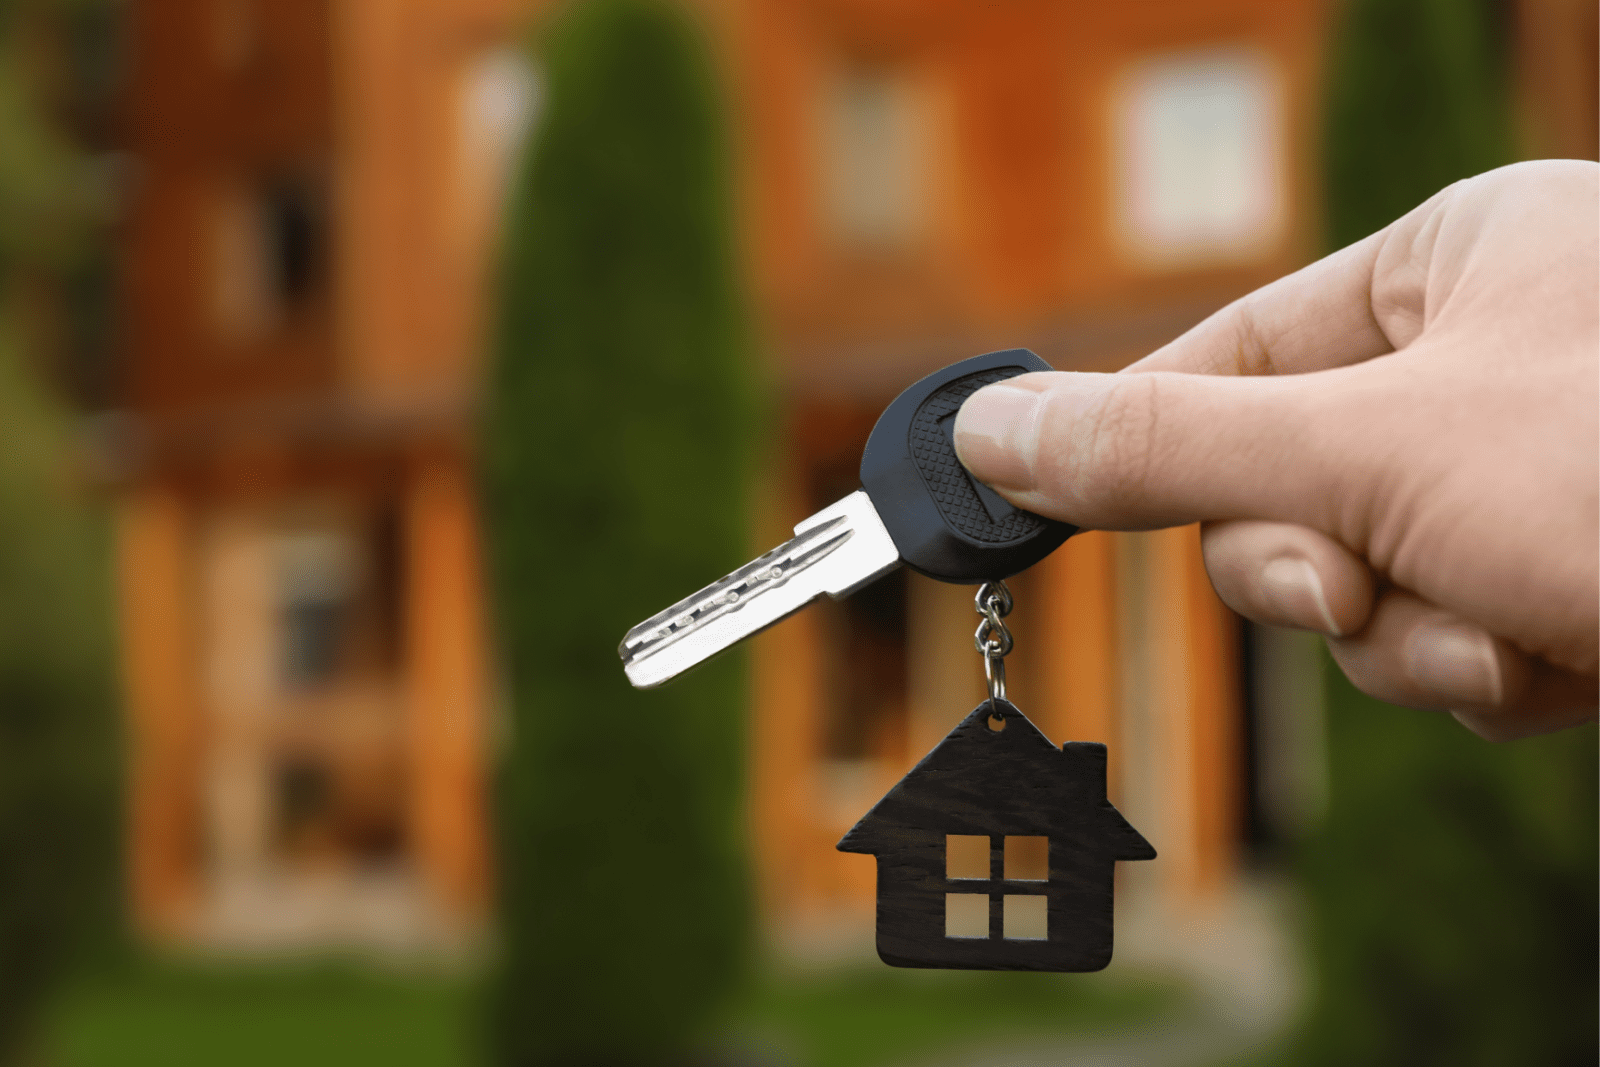 Approved buyers get the keys to their new home